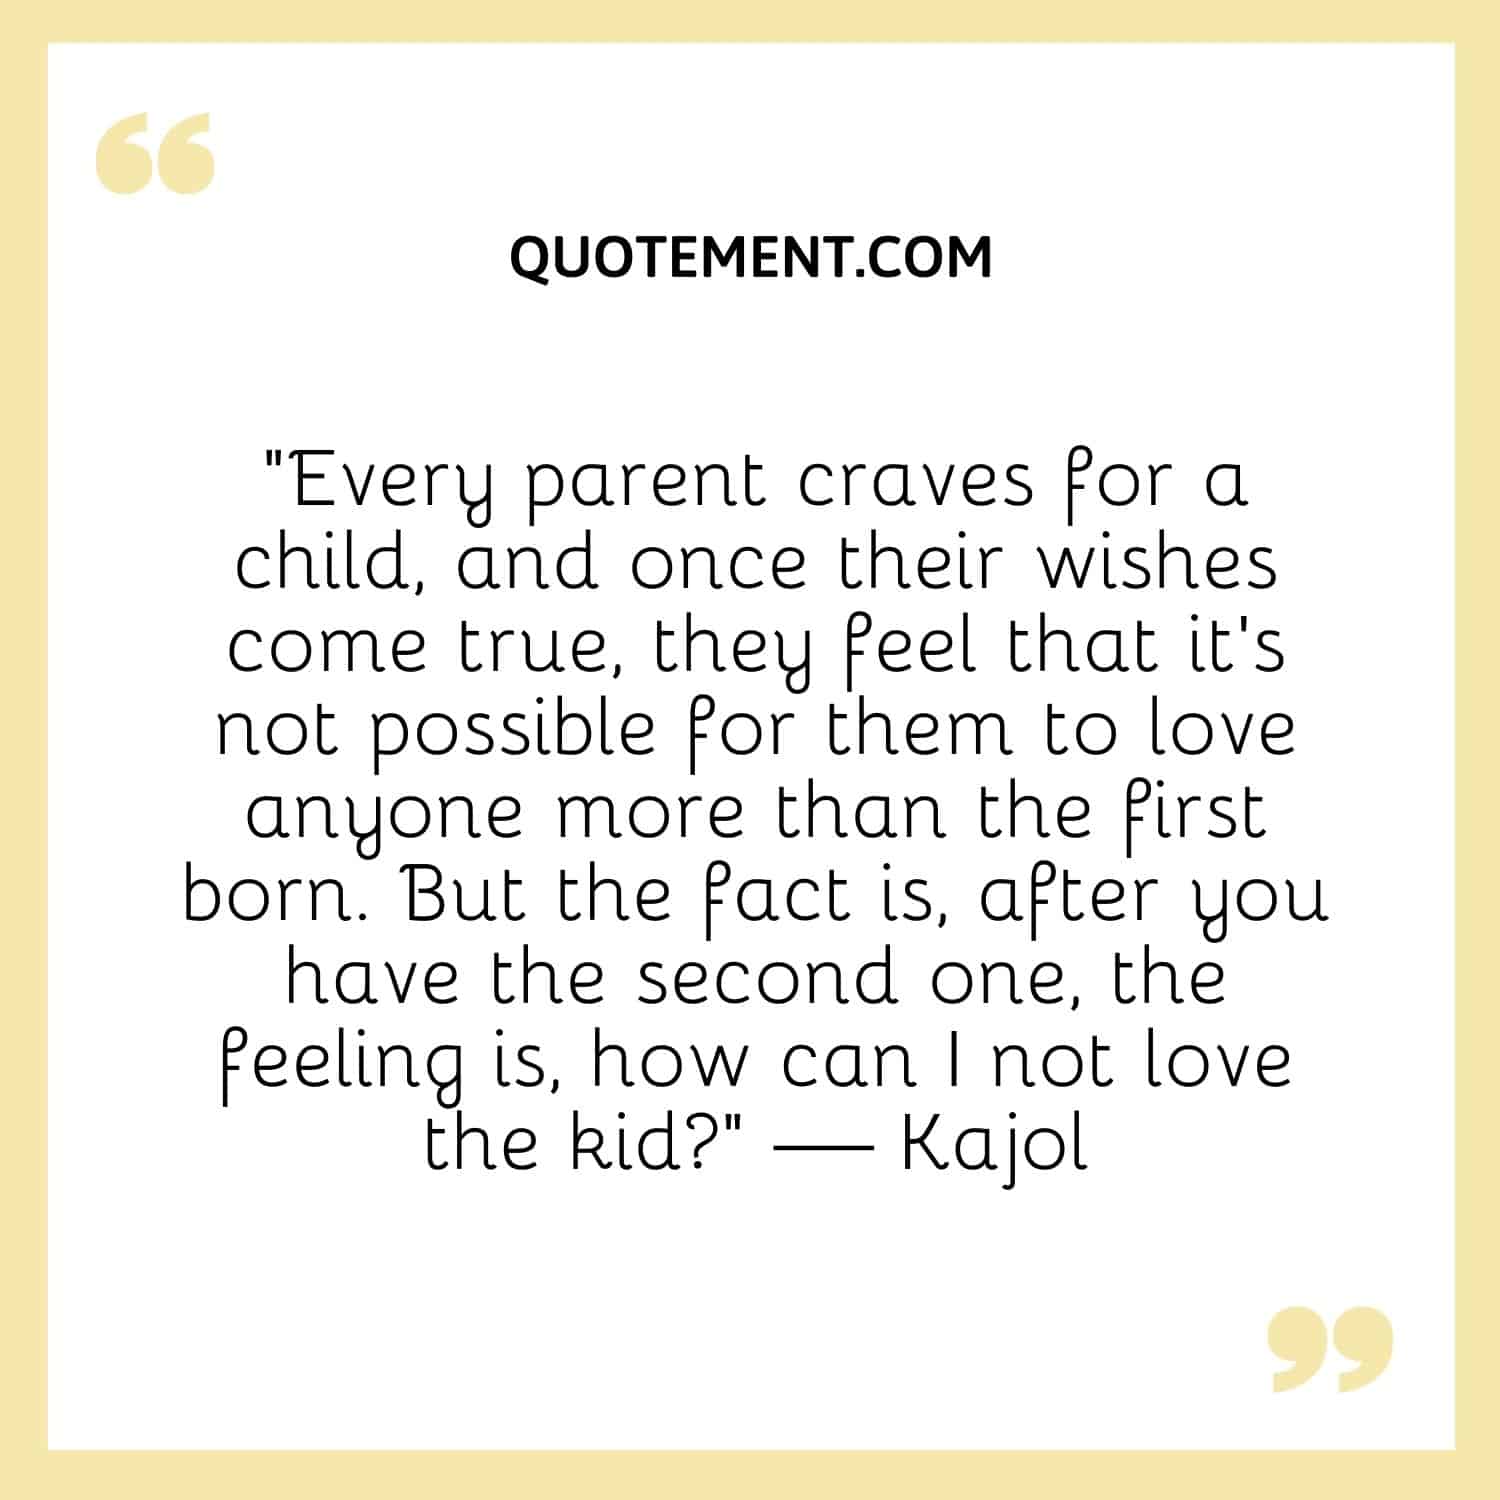 Every parent craves for a child, and once their wishes come true